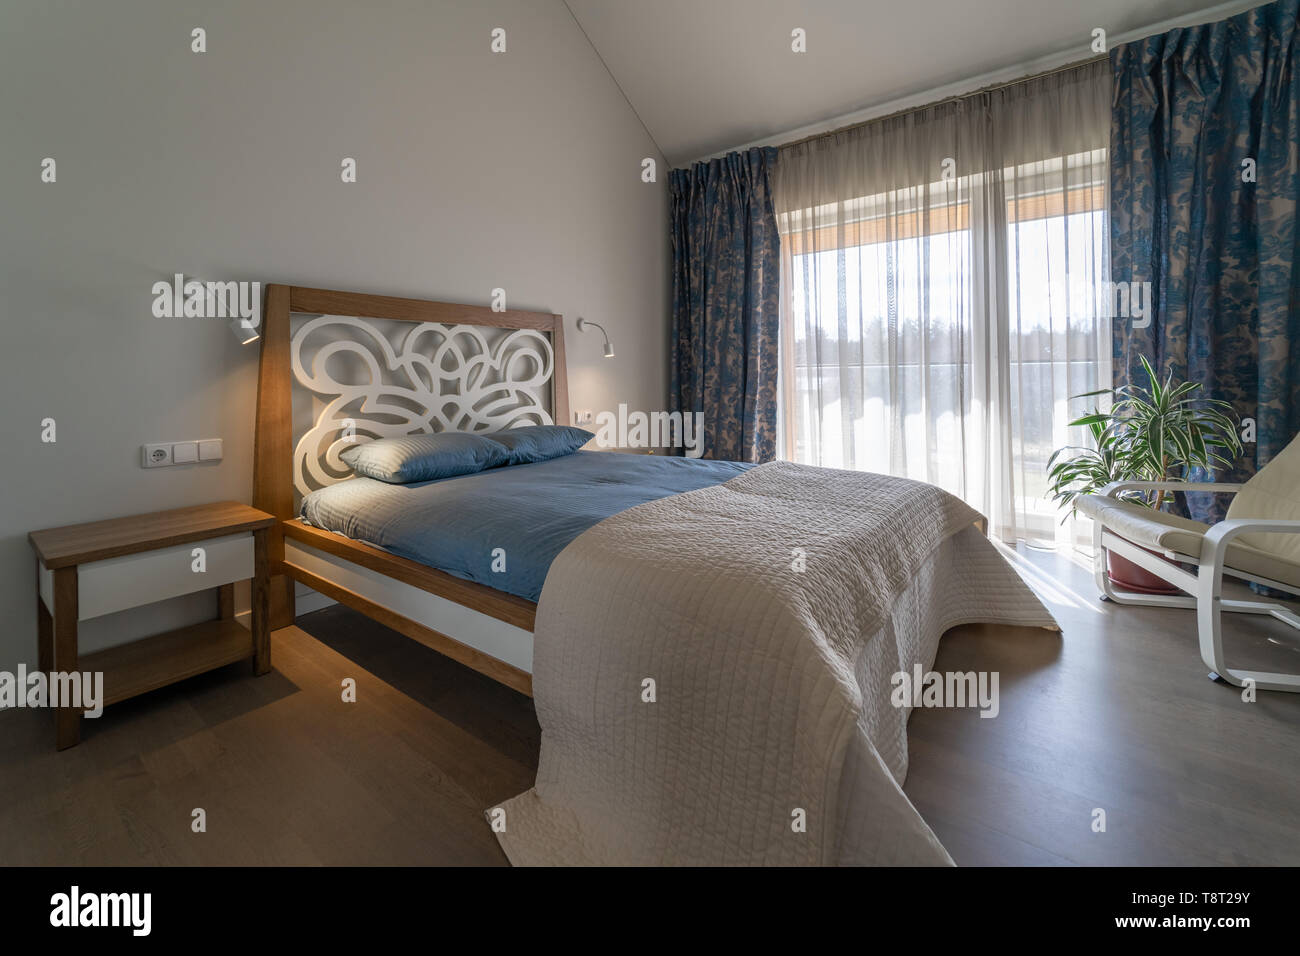 Large Double Bed Room Lots Pillows Bed Bedside Tables Decorative Stock  Photo by ©Vrn36 369933772